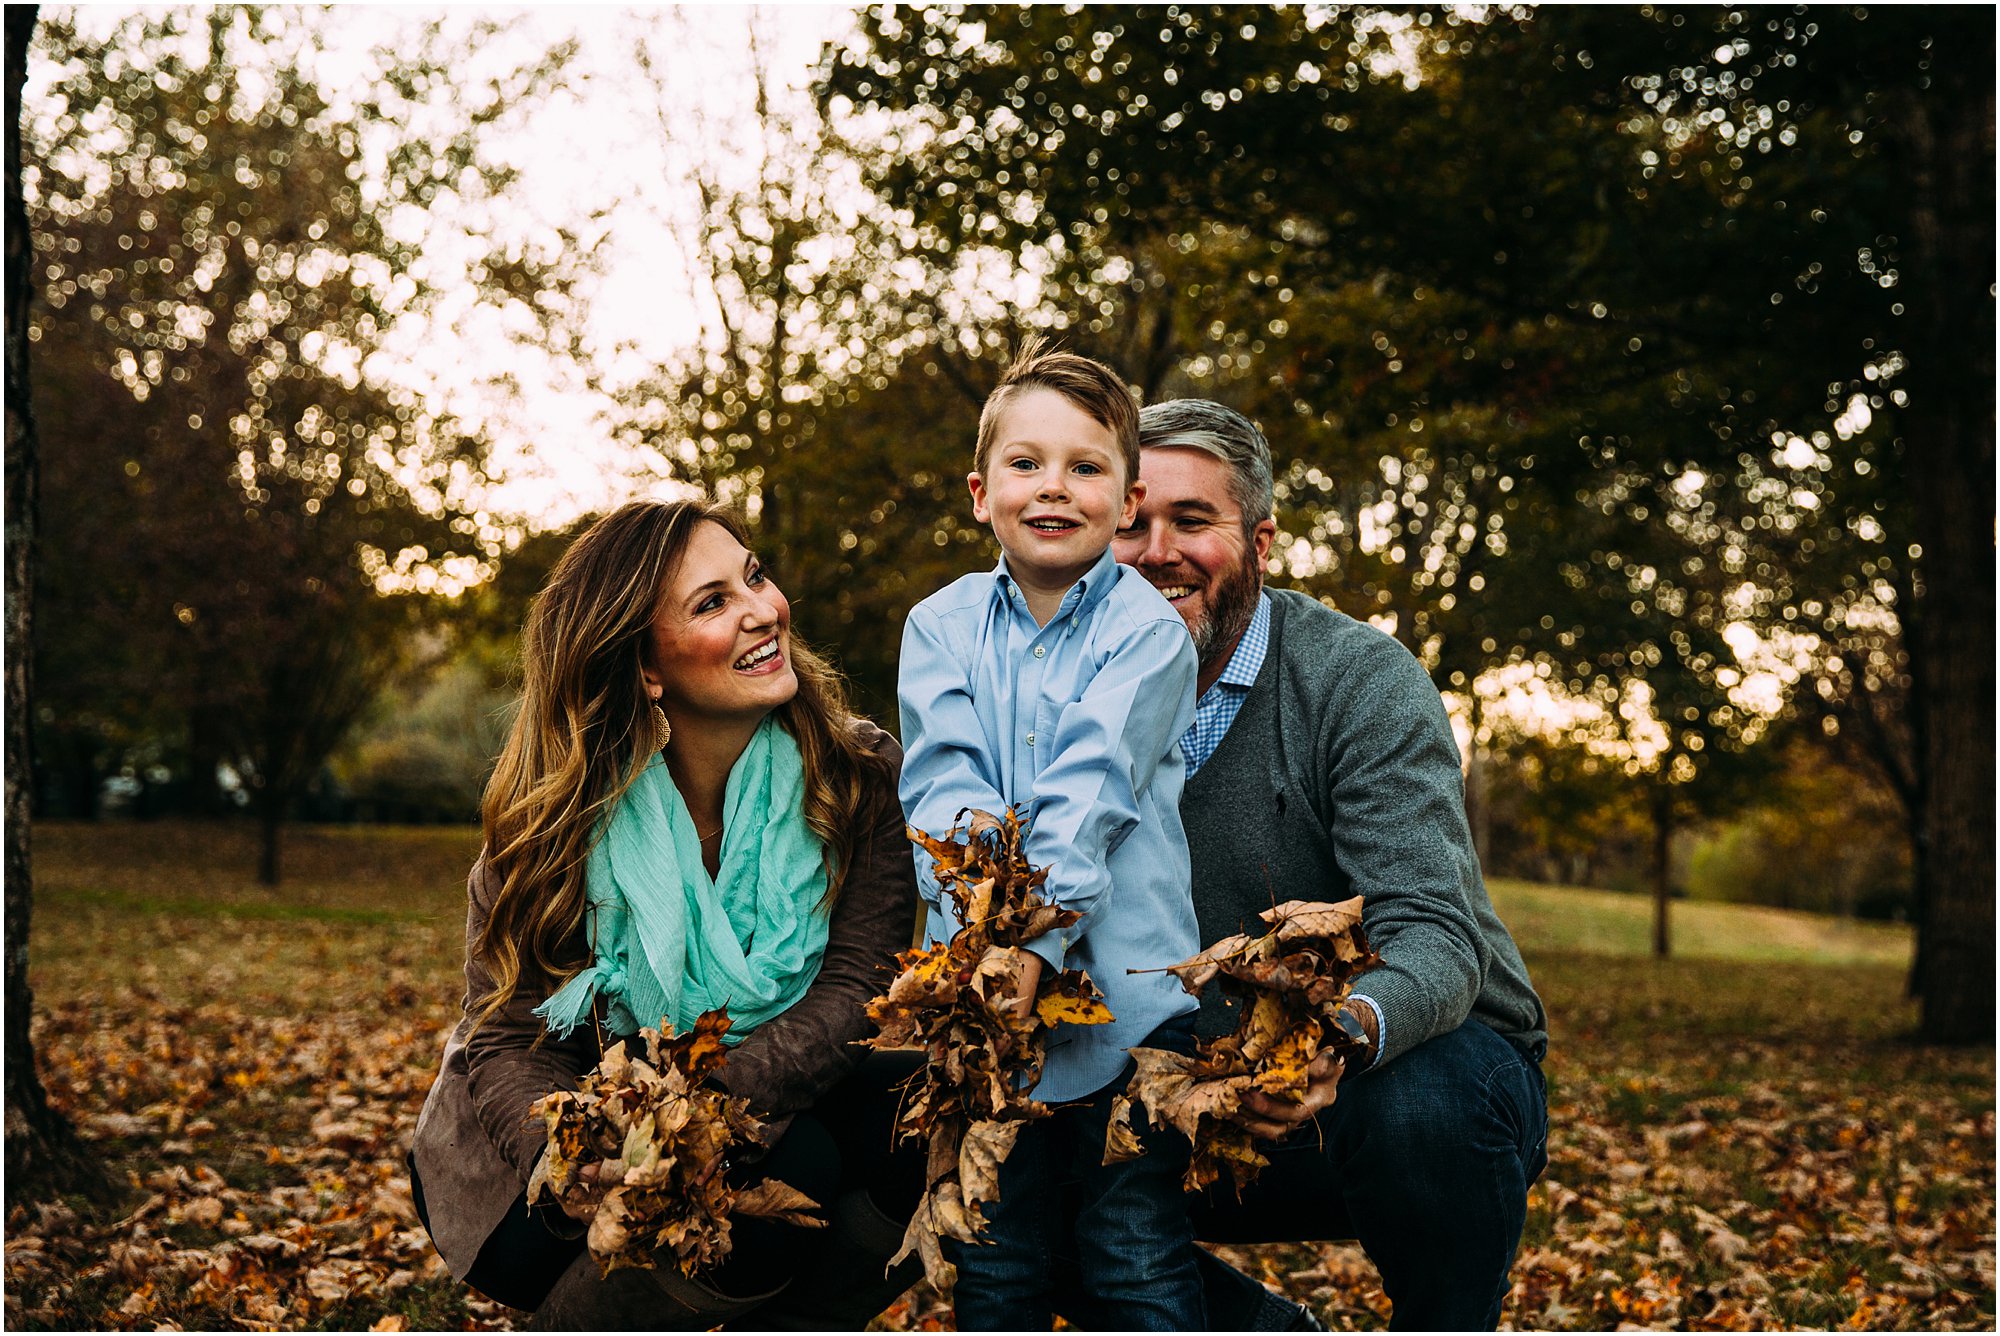 Family of three throwing fall leaves up together